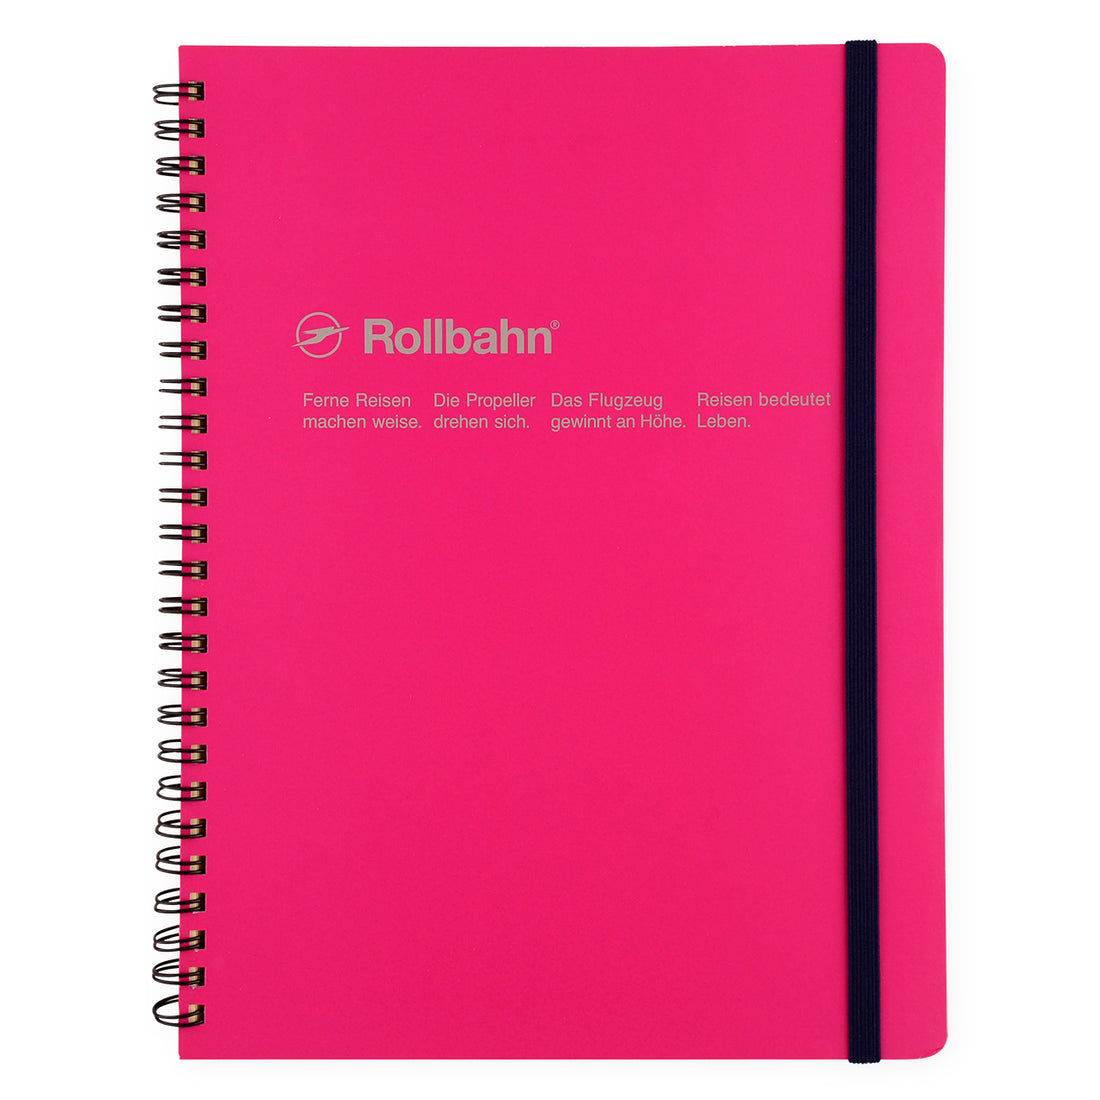 Delfonics Rollbahn Notebook Small, Large Or A5 | 9 Colors Rose / Small (4.5 x 5.5")